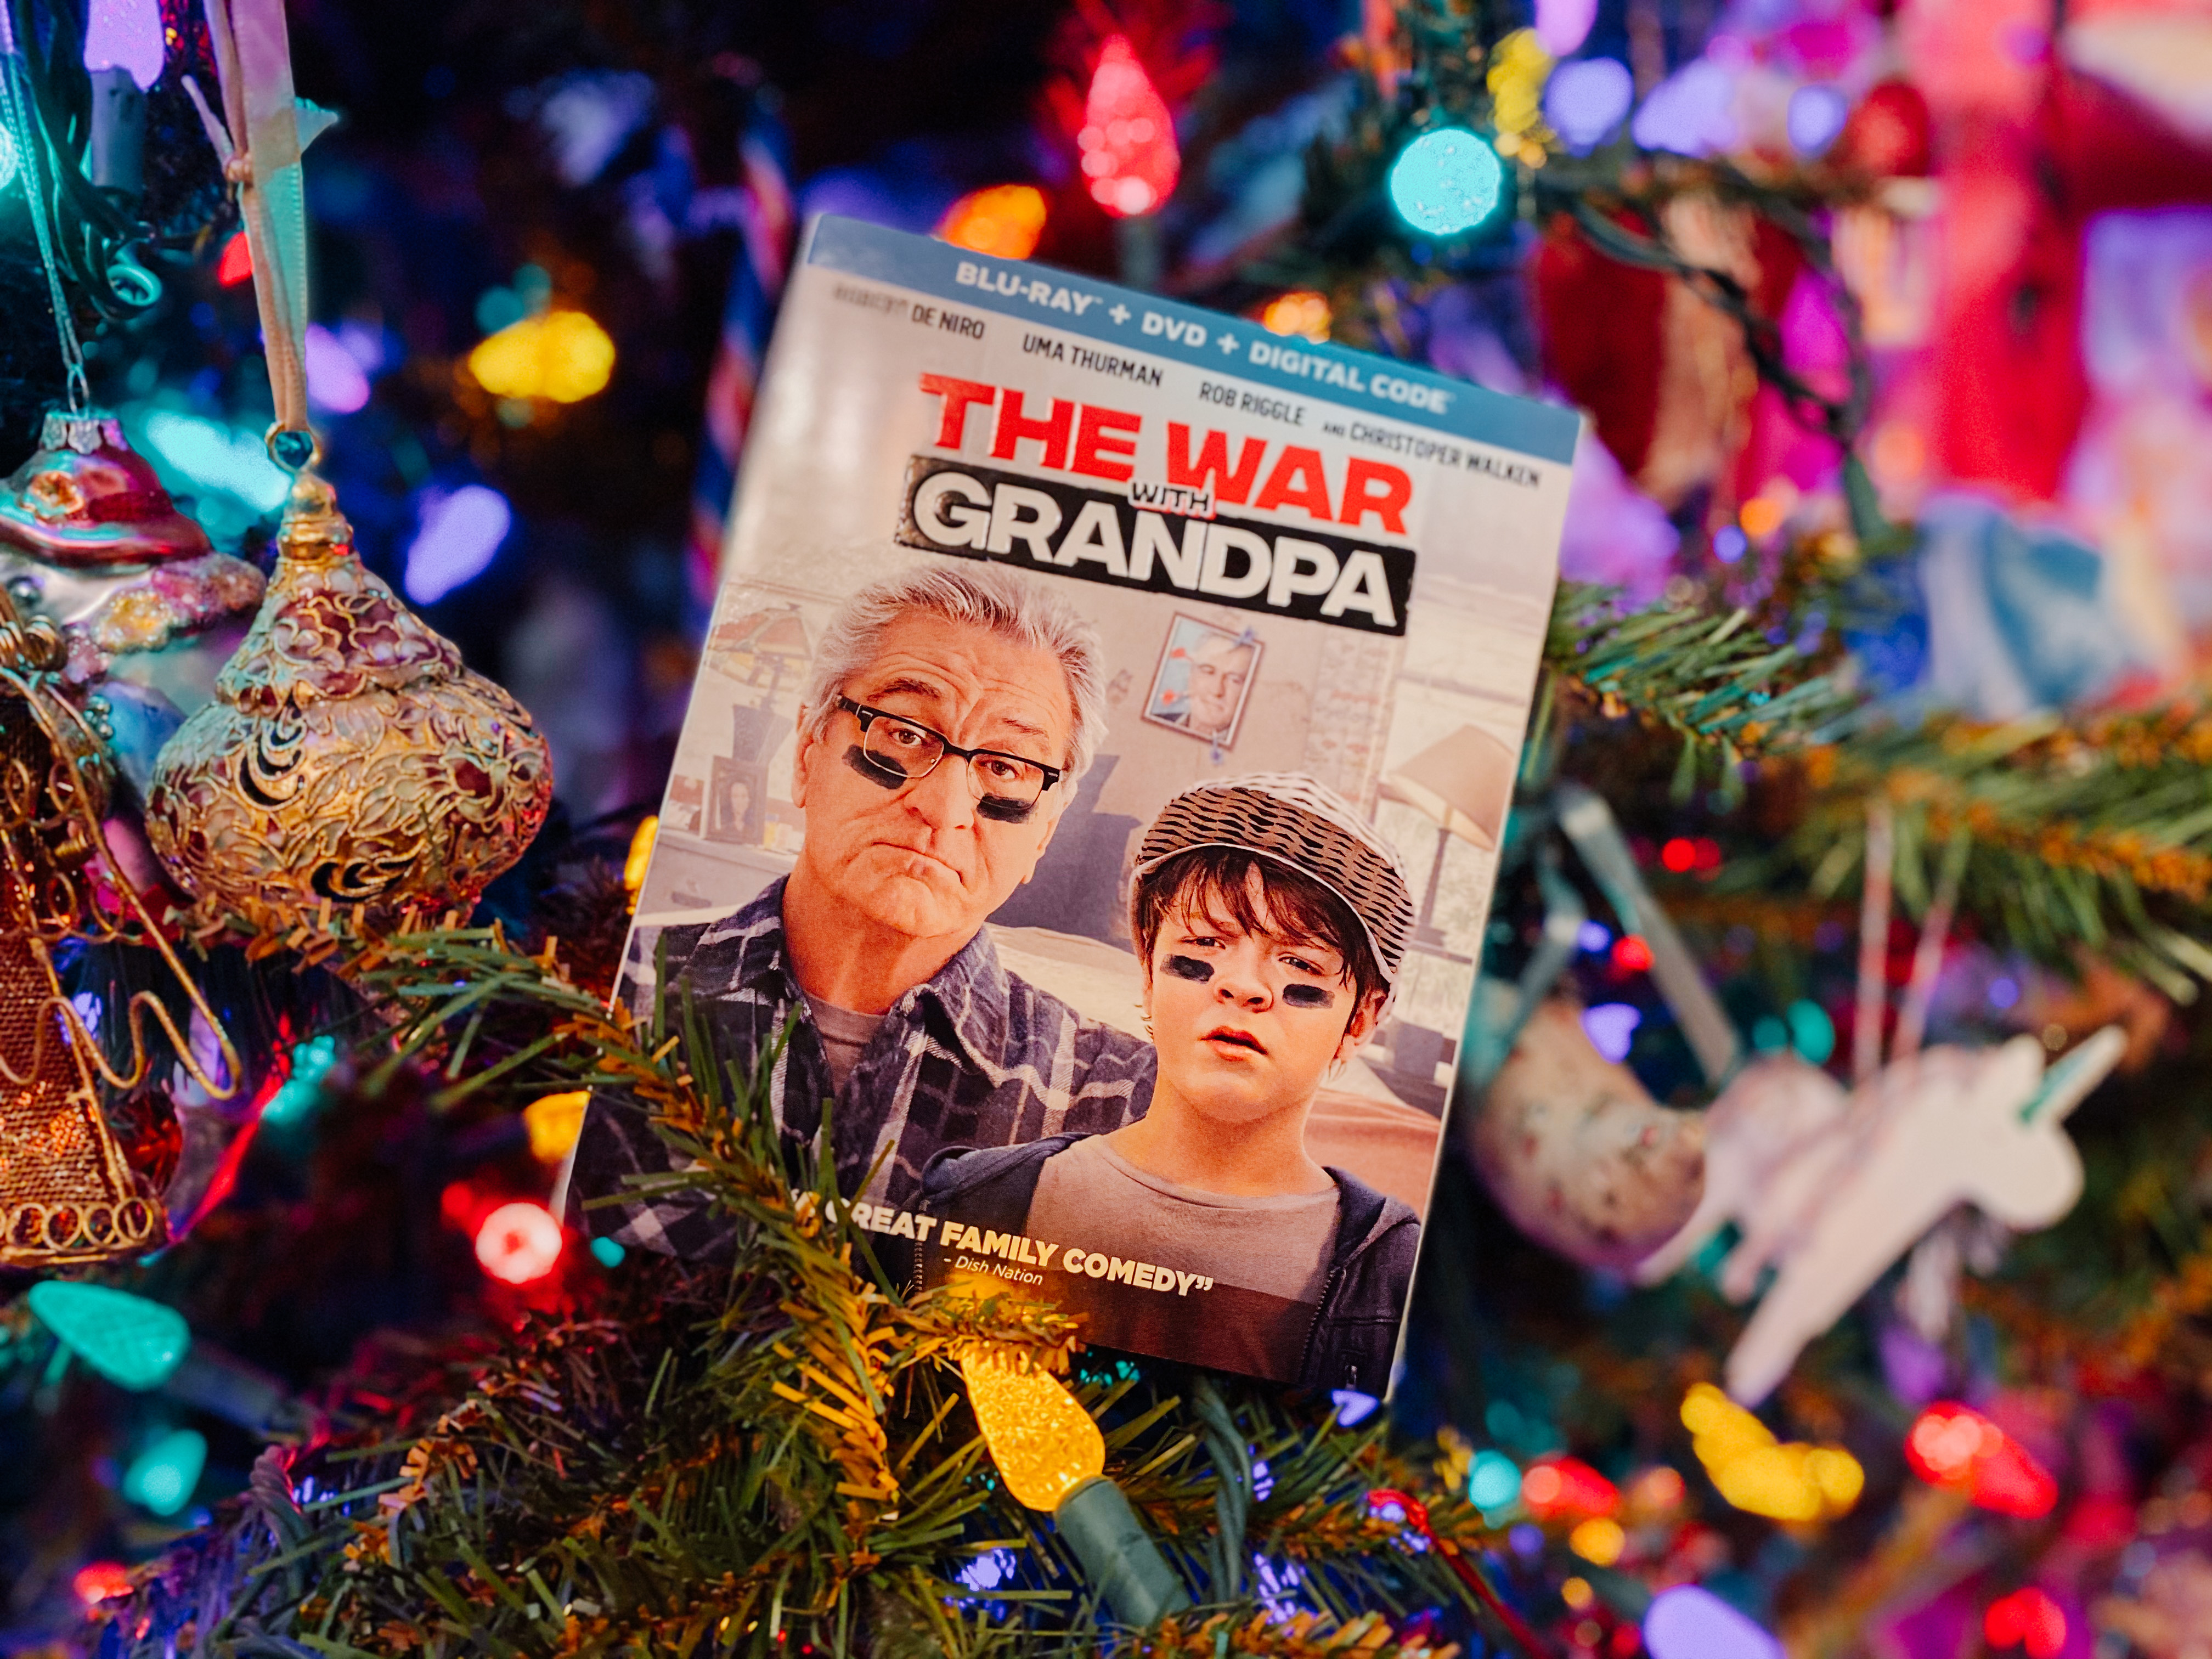 Universal Pictures' The War With Grandpa starring Robert De Niro now on DVD and Blu-Ray